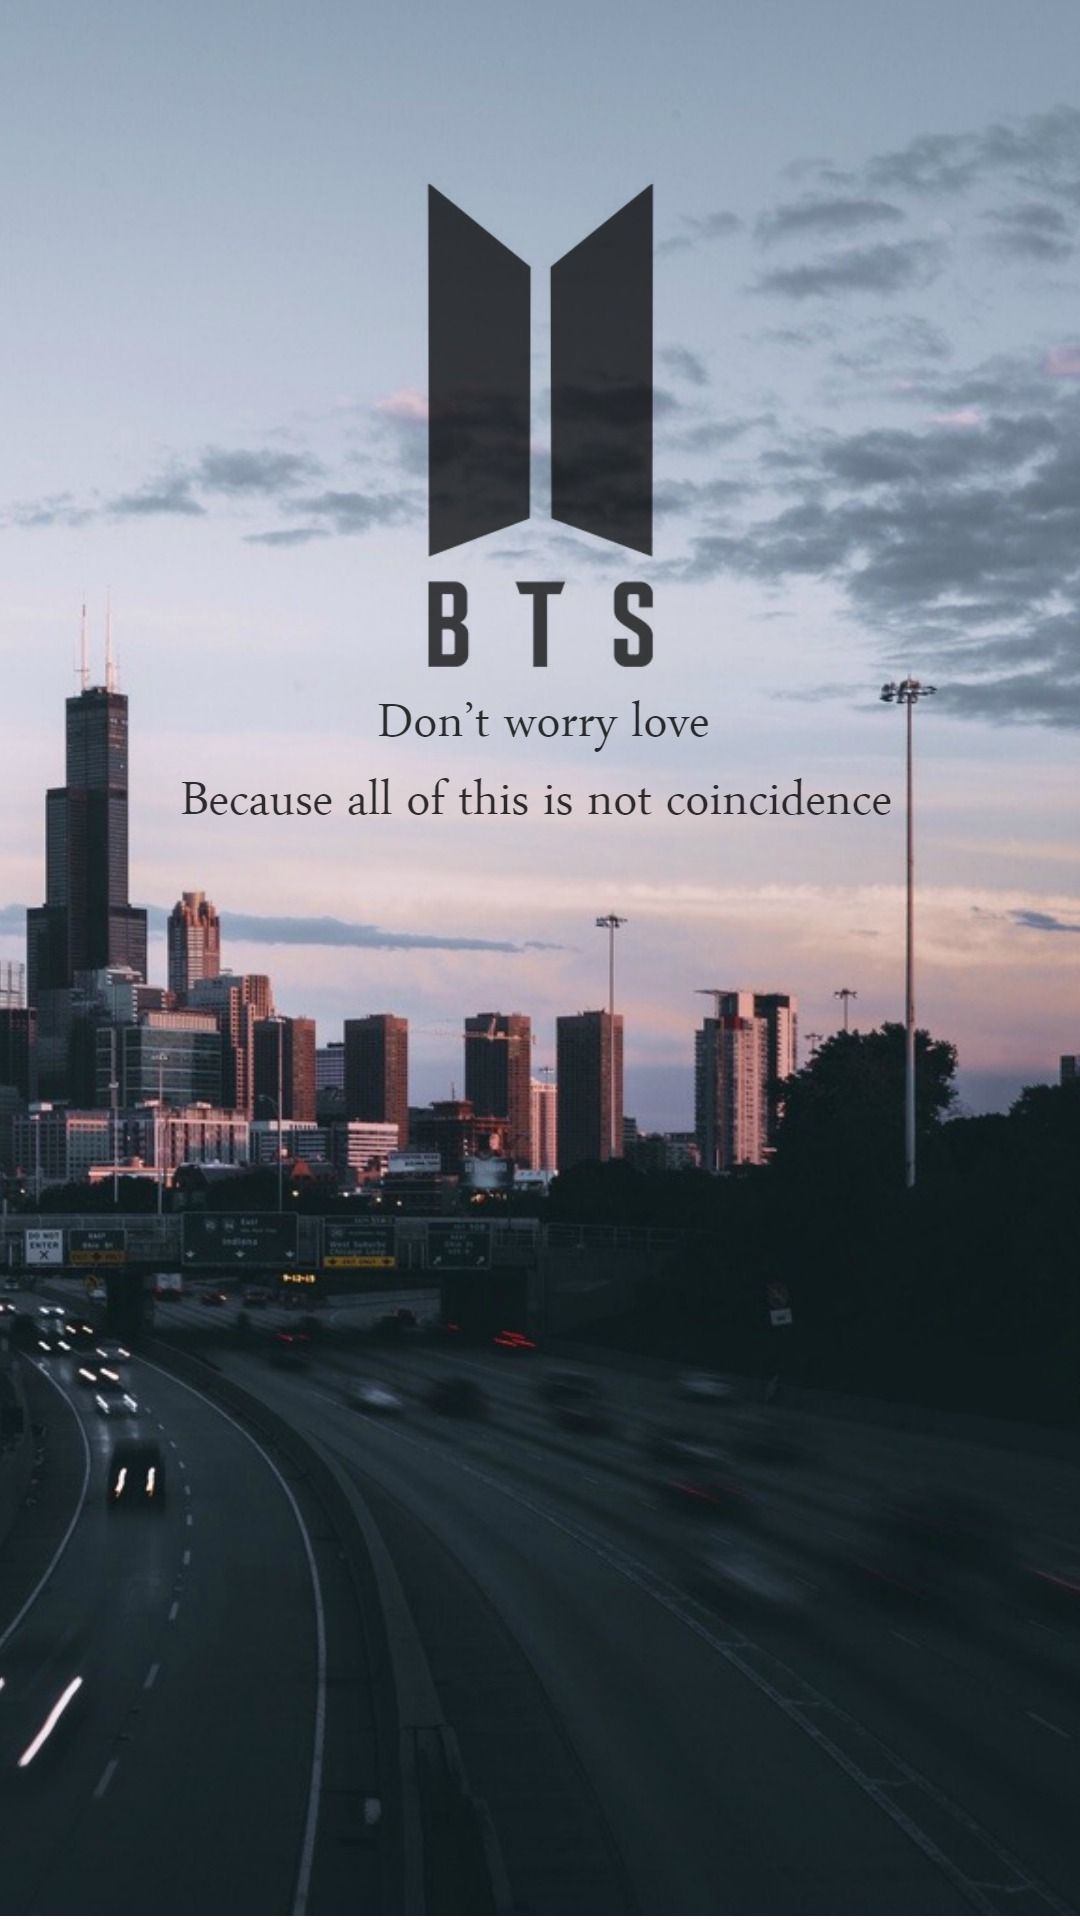 Bts wallpaper with high-resolution 1080x1920 pixel. You can use this wallpaper for your Windows and Mac OS computers as well as your Android and iPhone smartphones - BTS